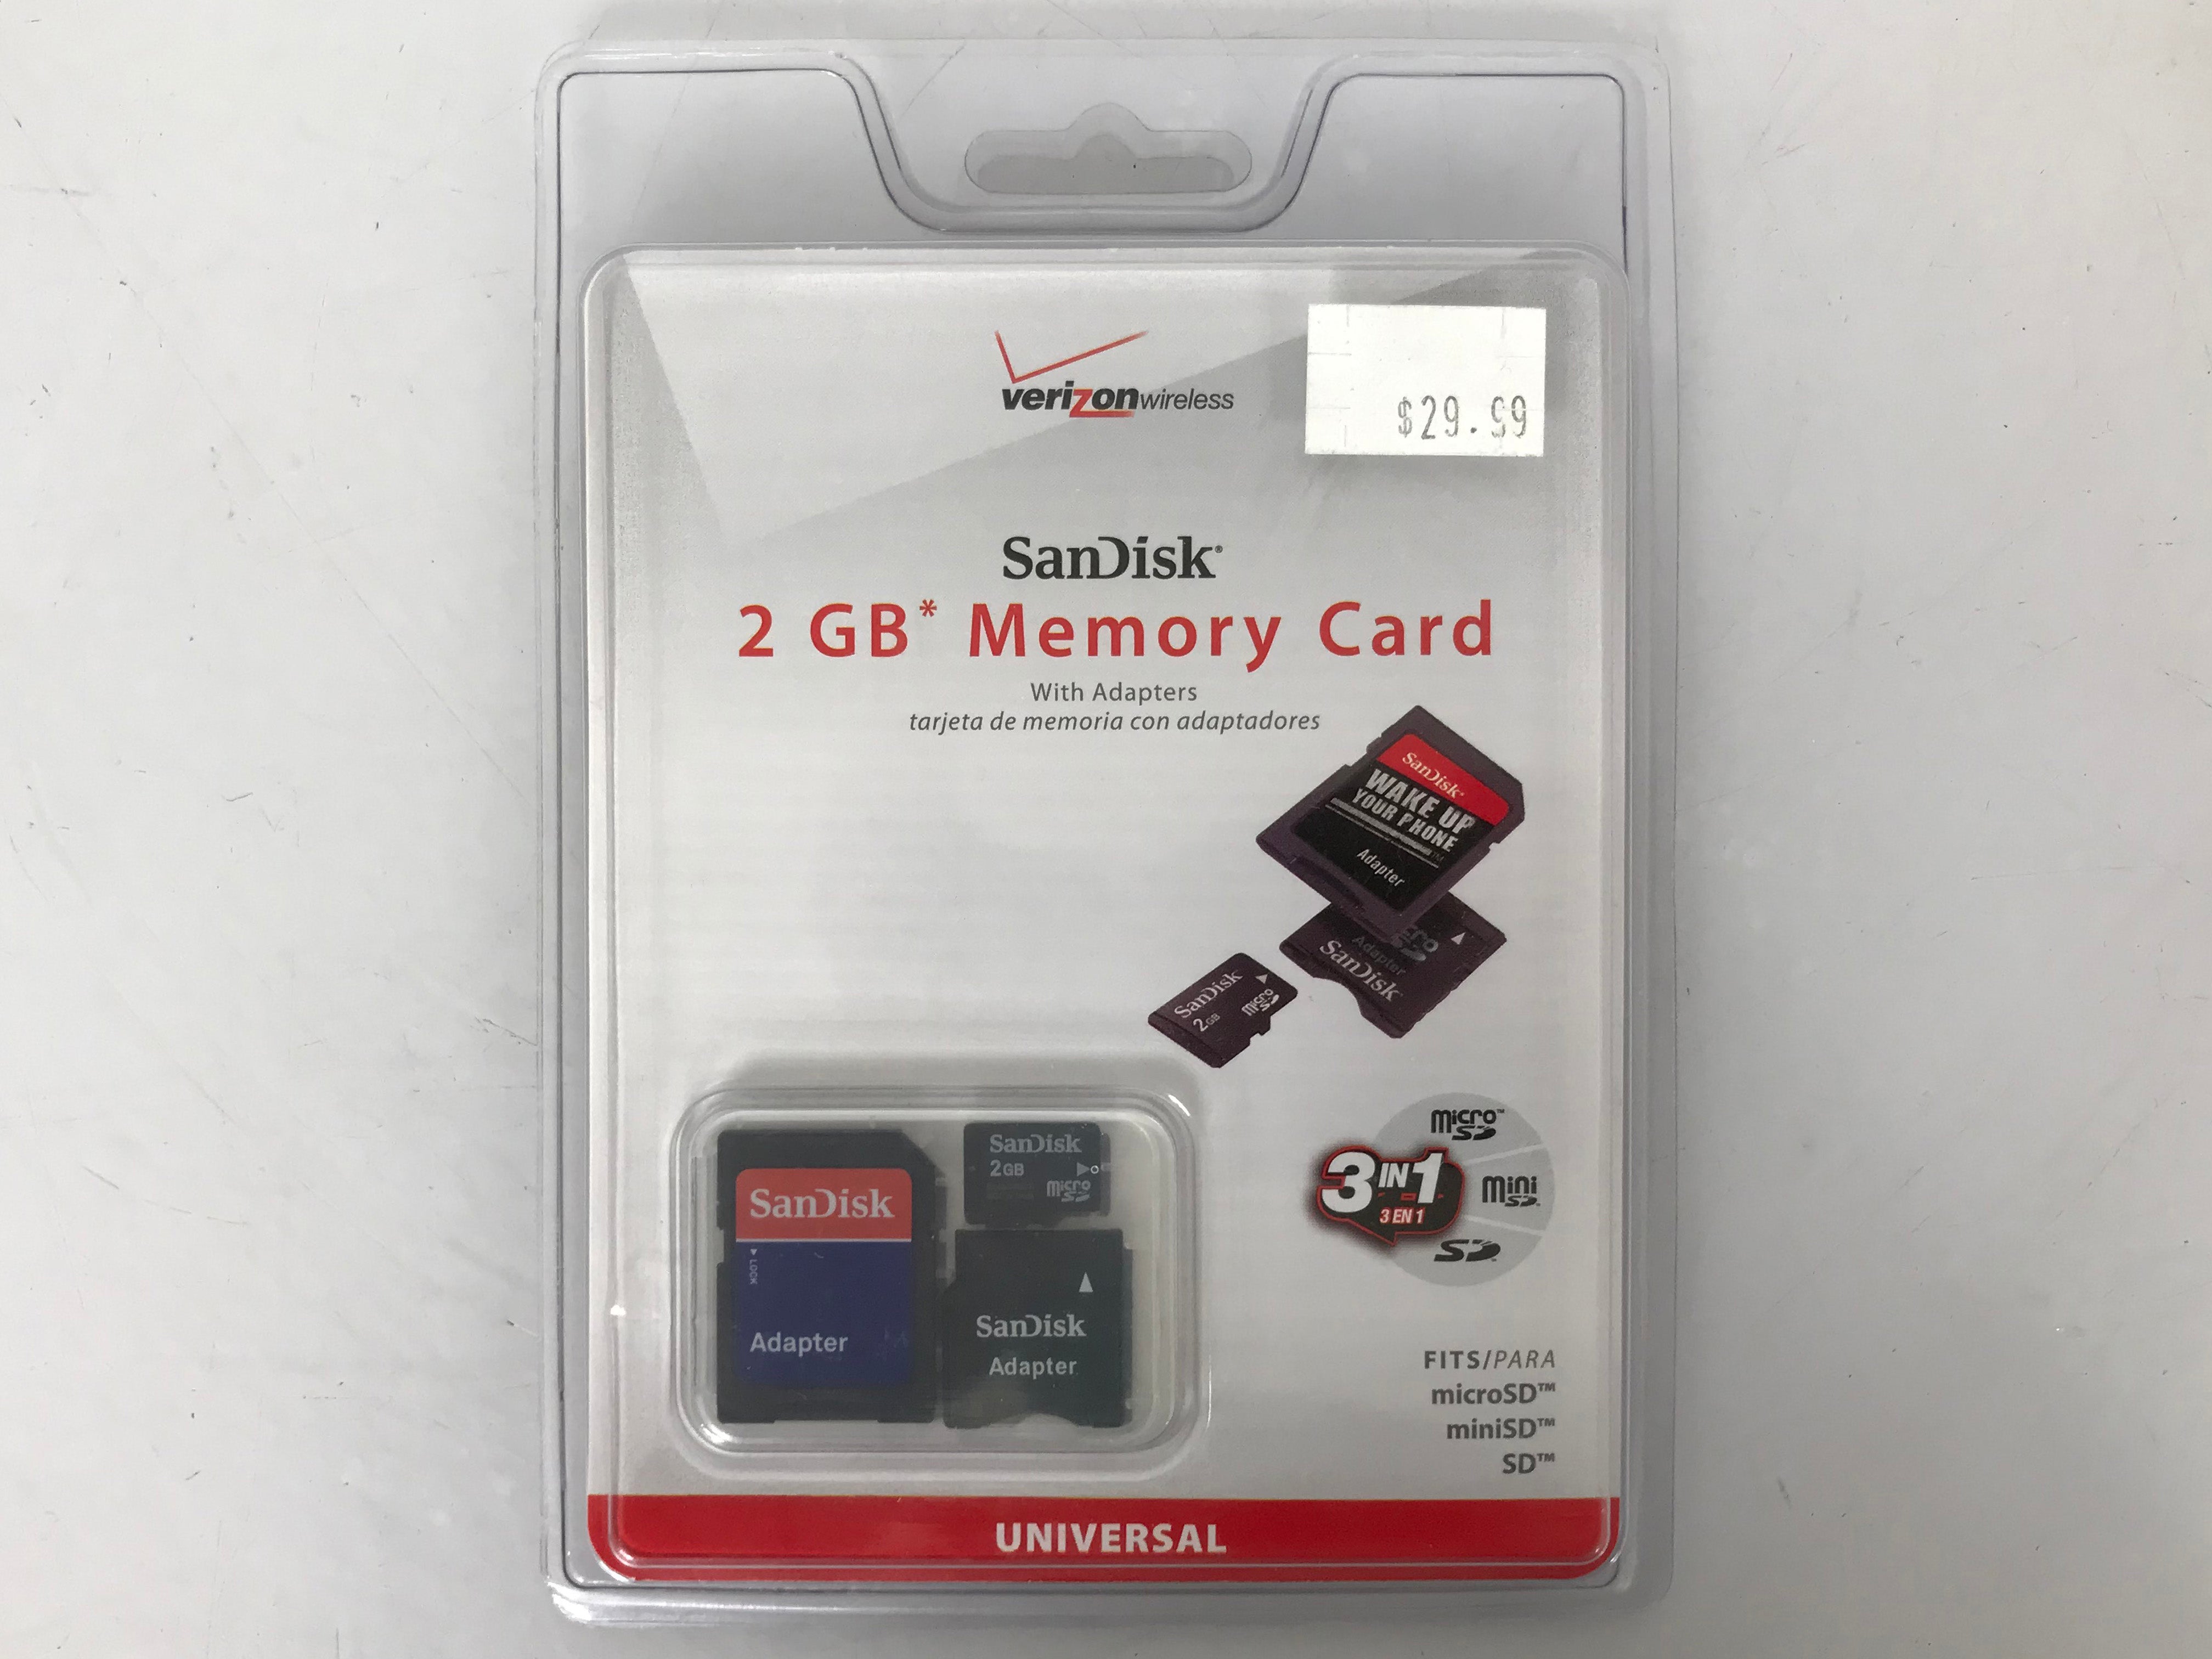 Sandisk 2GB Memory 3 in 1 MicroSD Card with Adapters